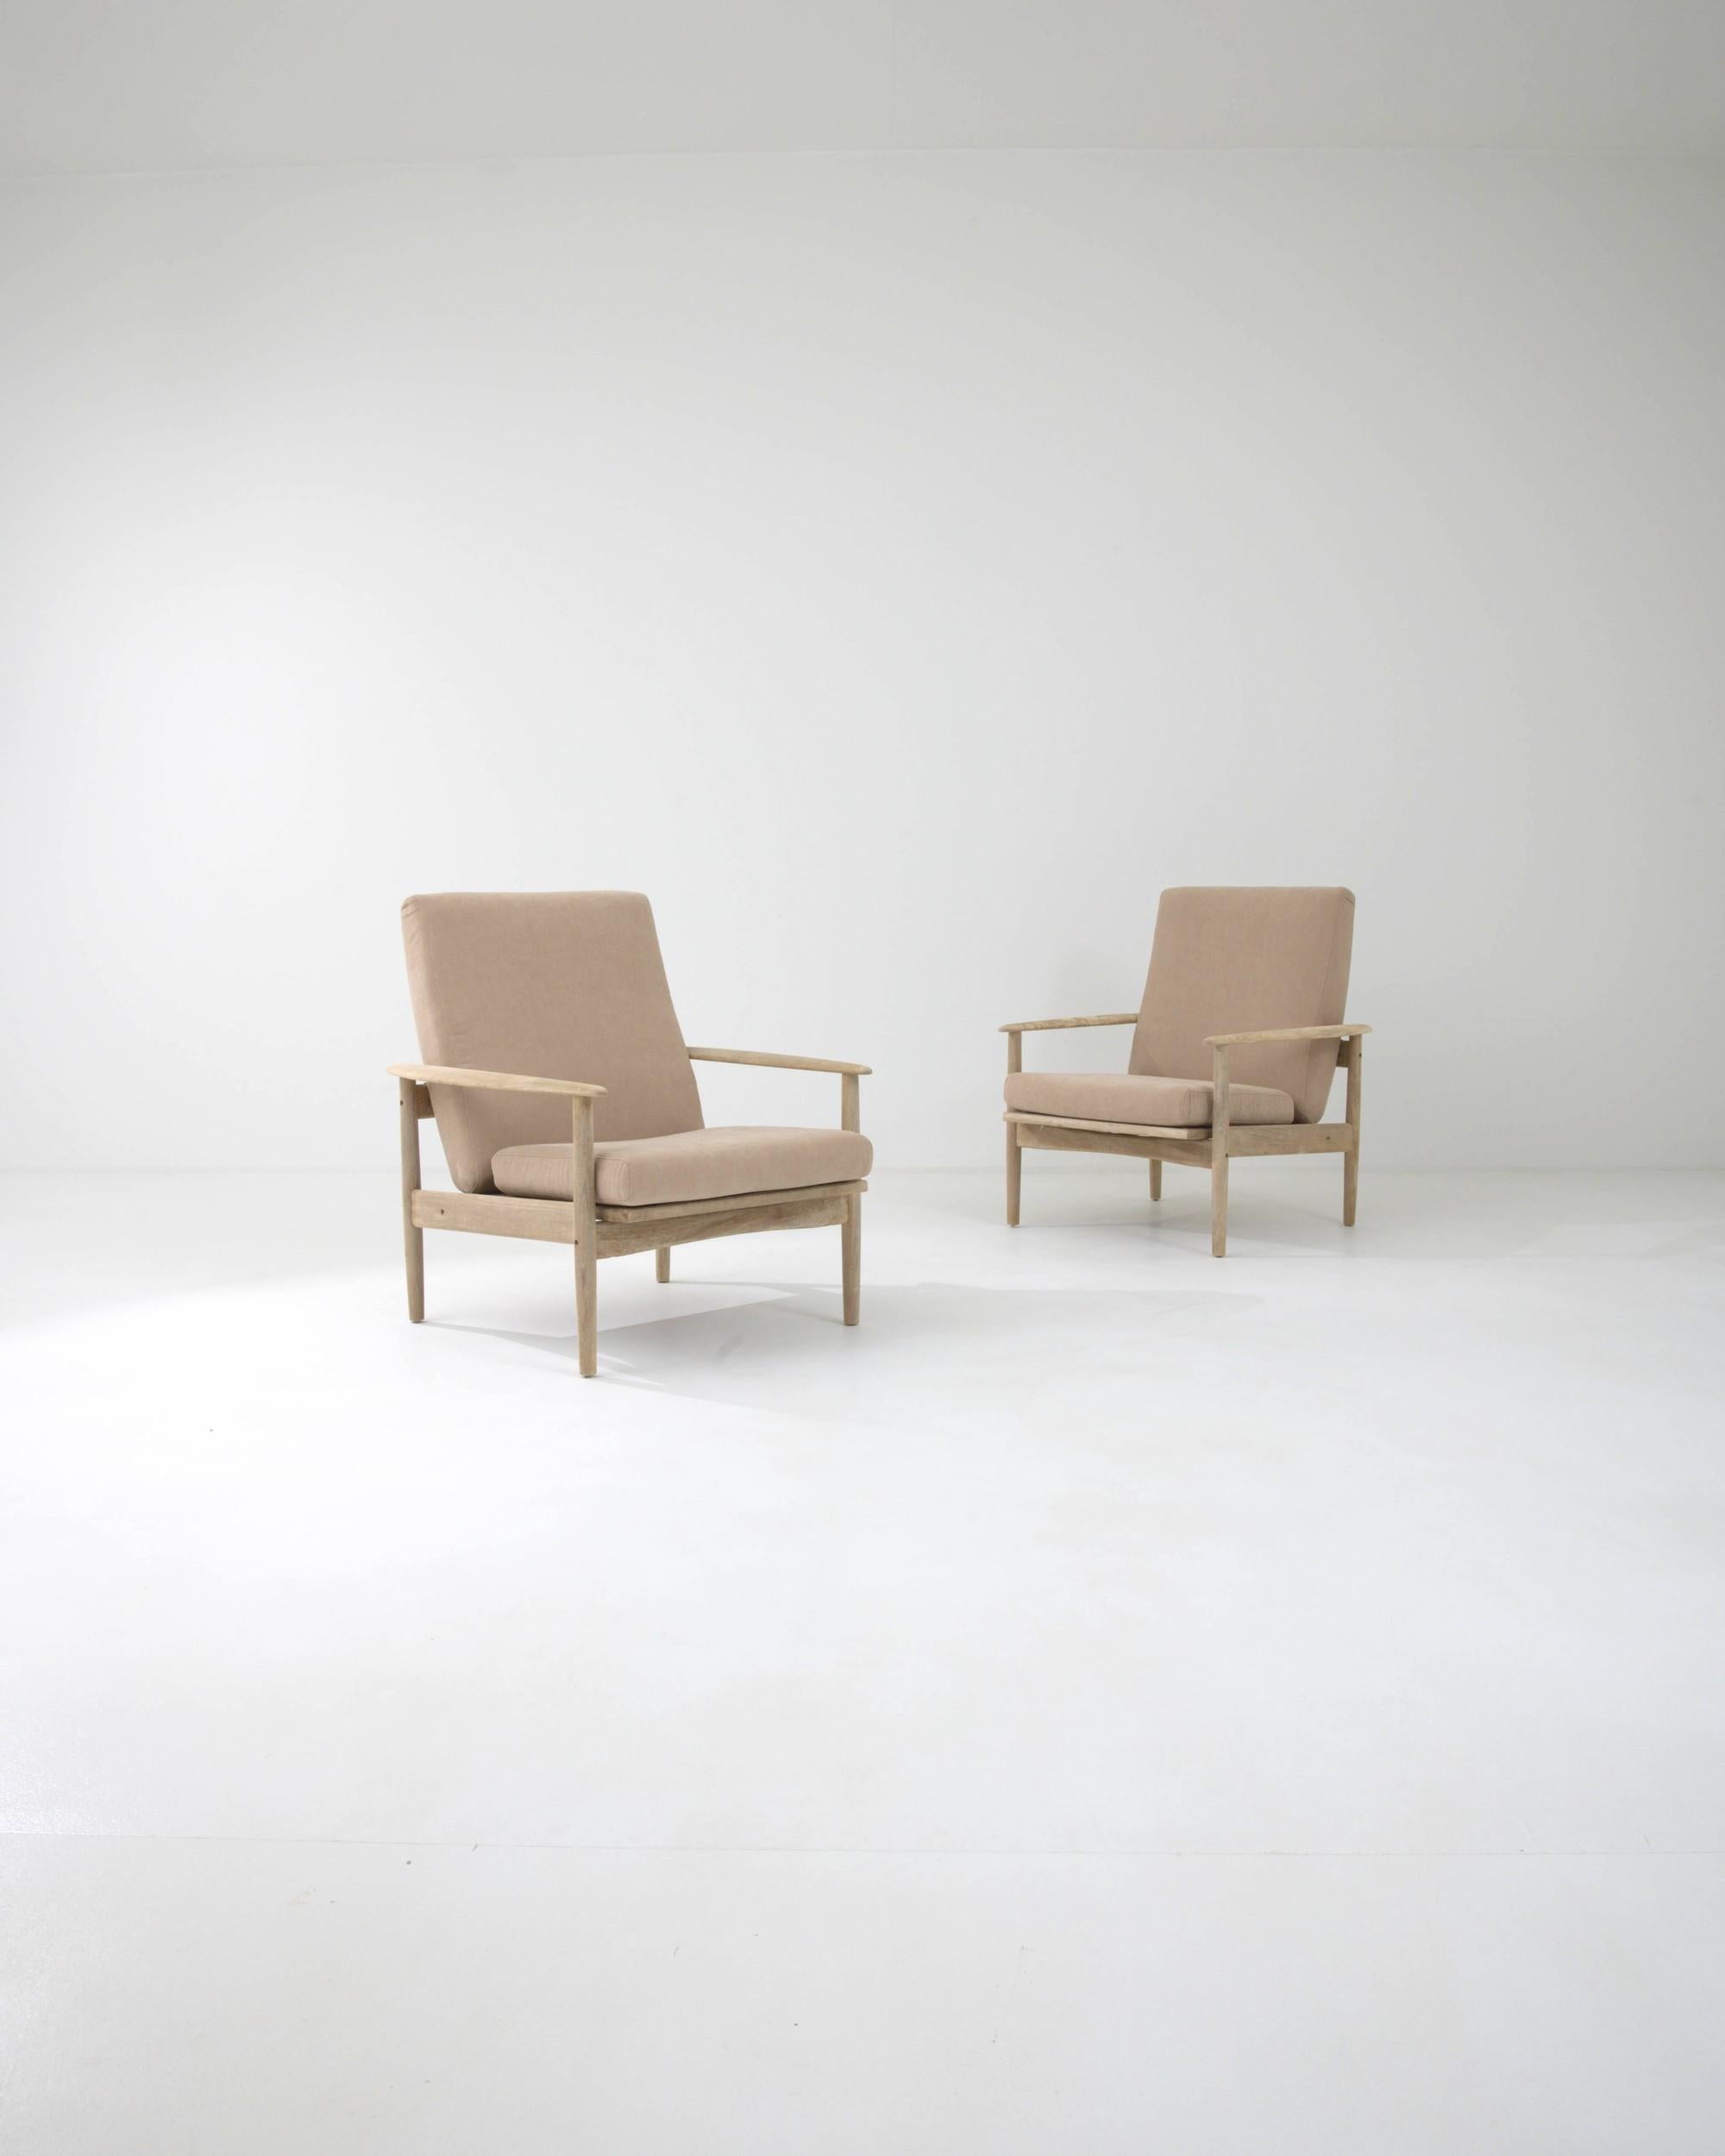 This attractive pair of vintage armchairs combine a stylish Modernist silhouette with a soothing color palette. Made in Czechia in the 1970s, the clean lines of the wooden frame are softened by gently rounded armrests and the arched contour of the